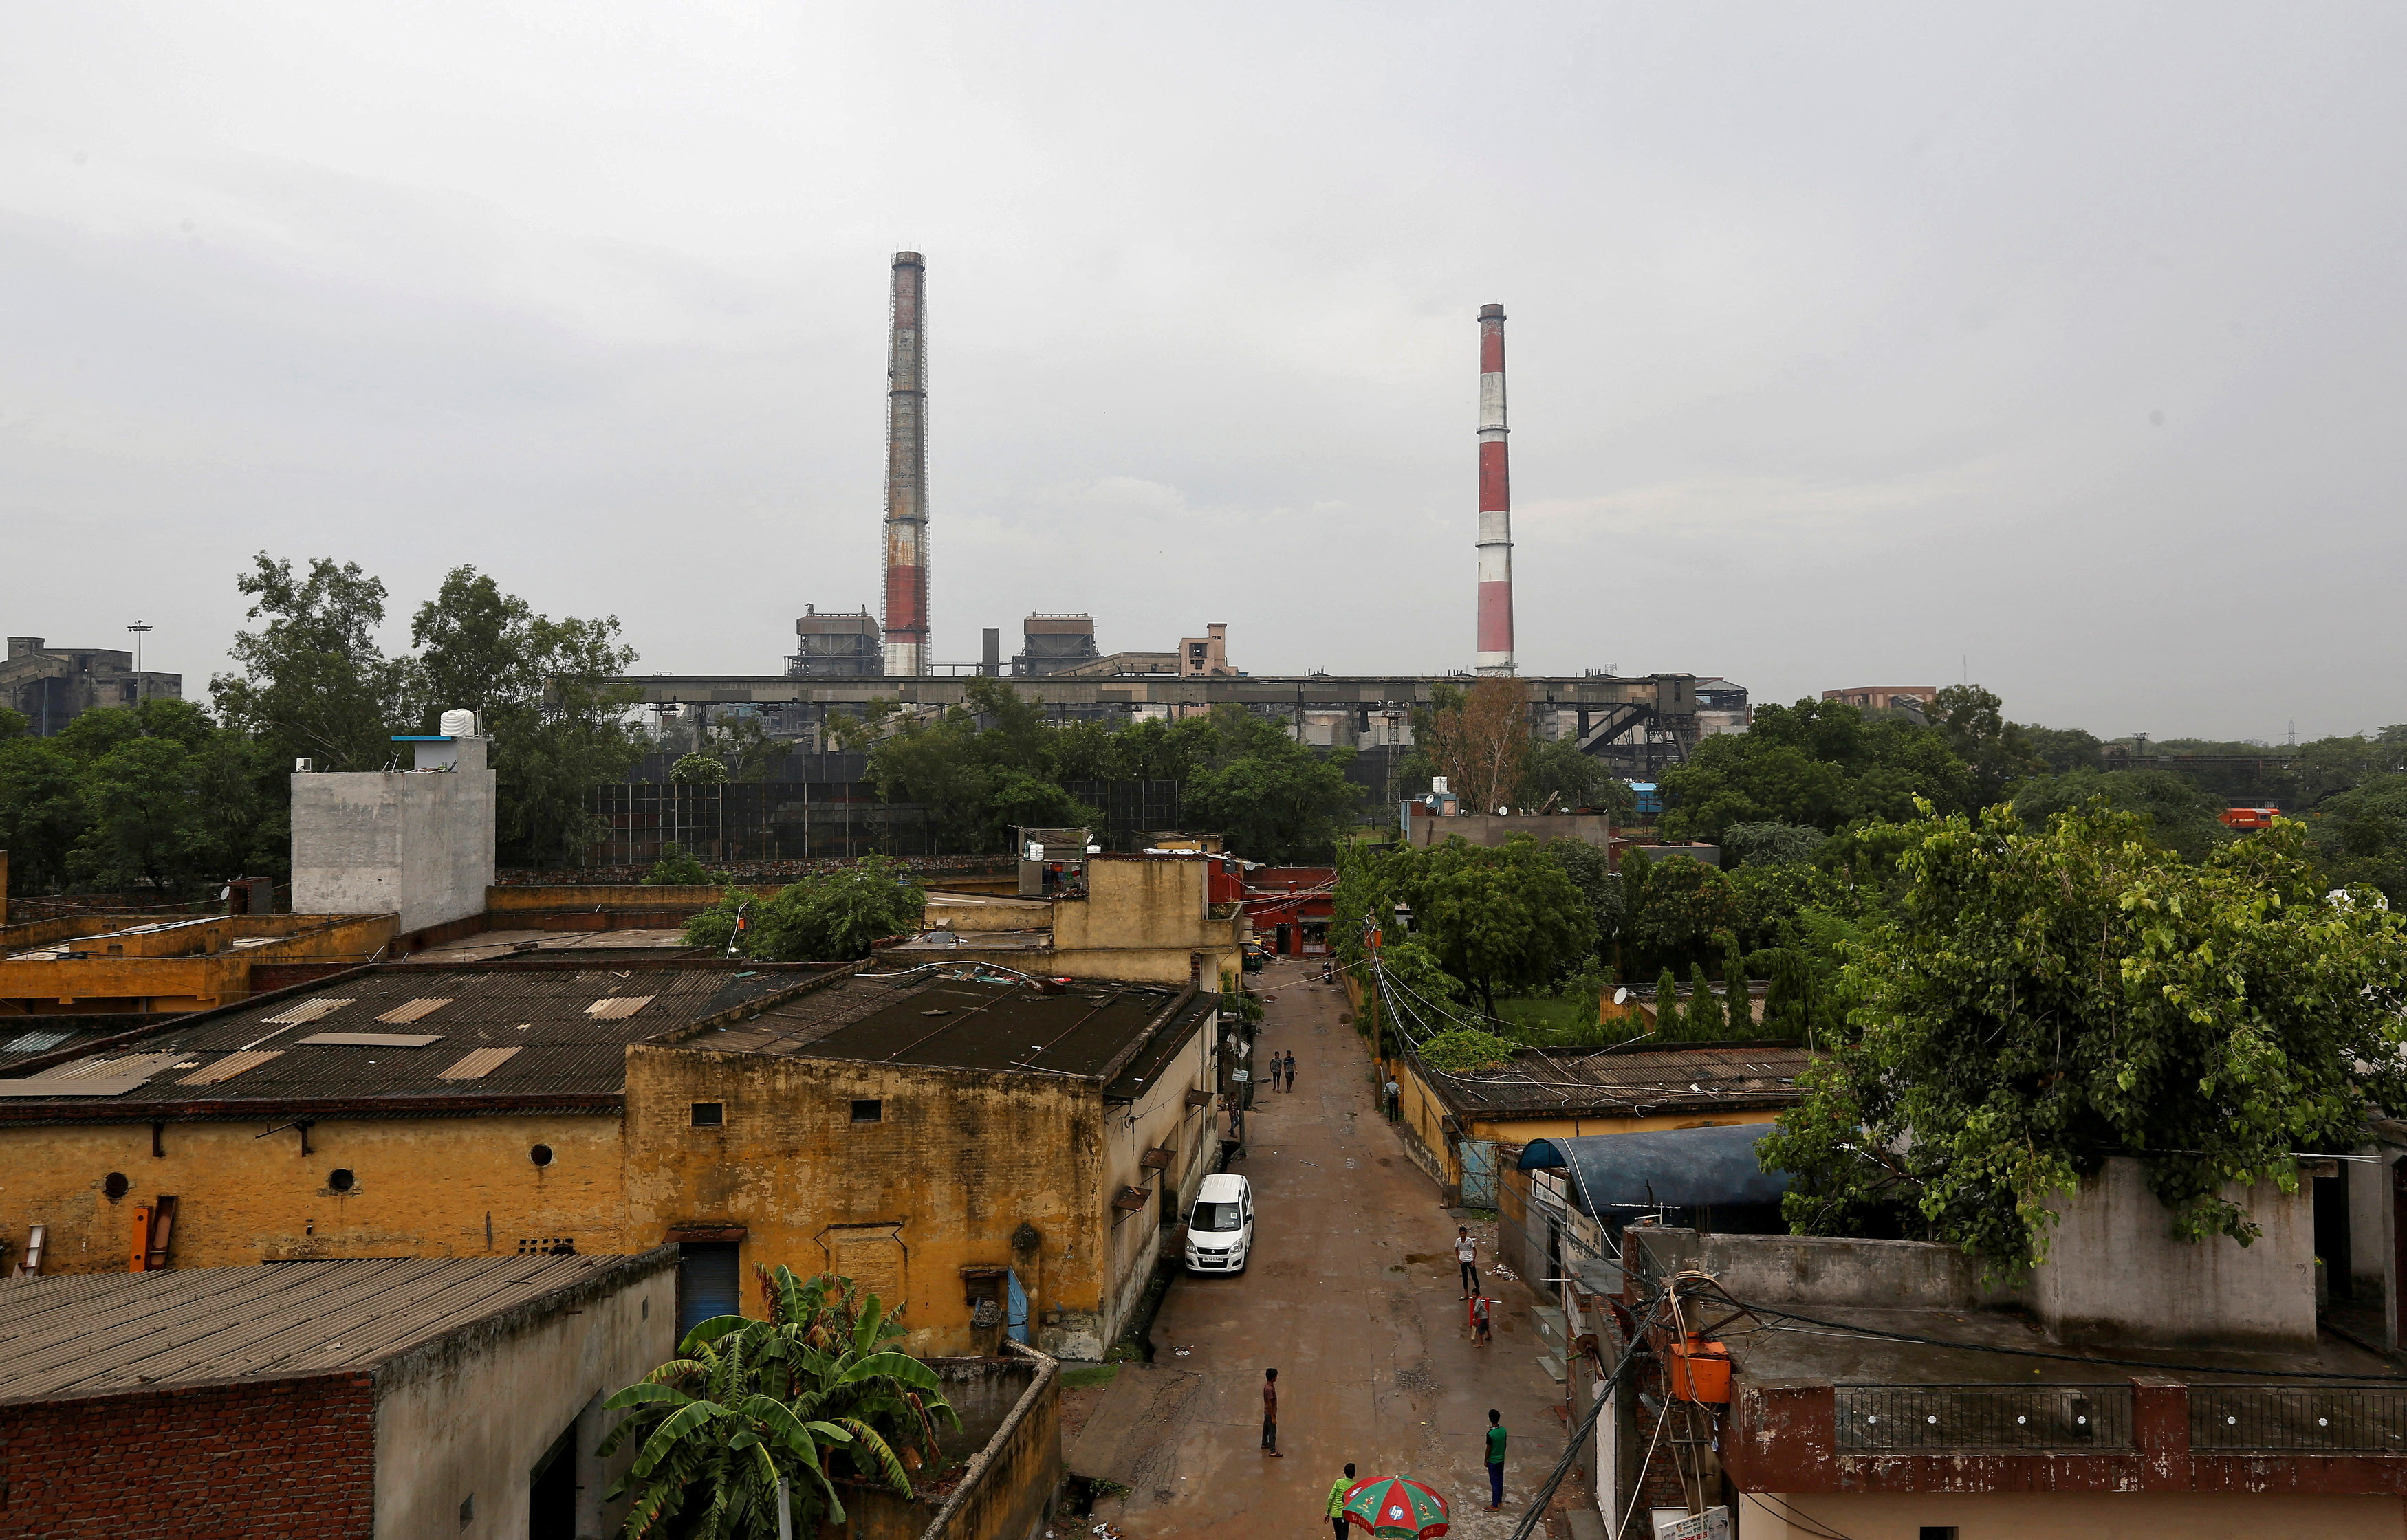 Chimneys of a coal-fired power plant are pictured in New Delhi